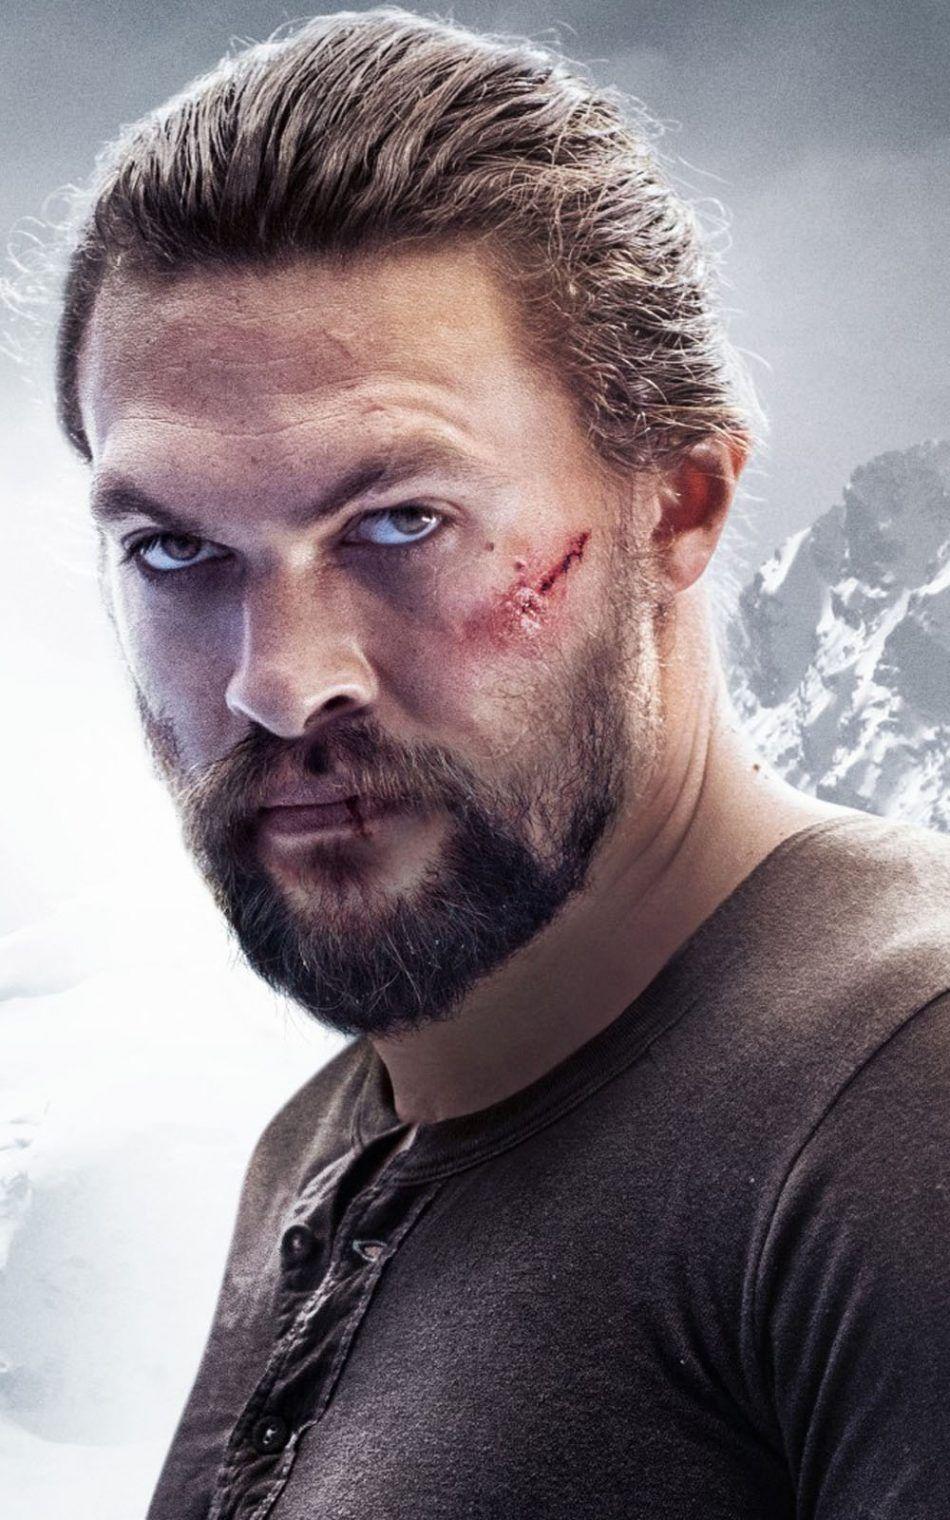 Jason Momoa In Braven Free 100% Pure HD Quality Mobile